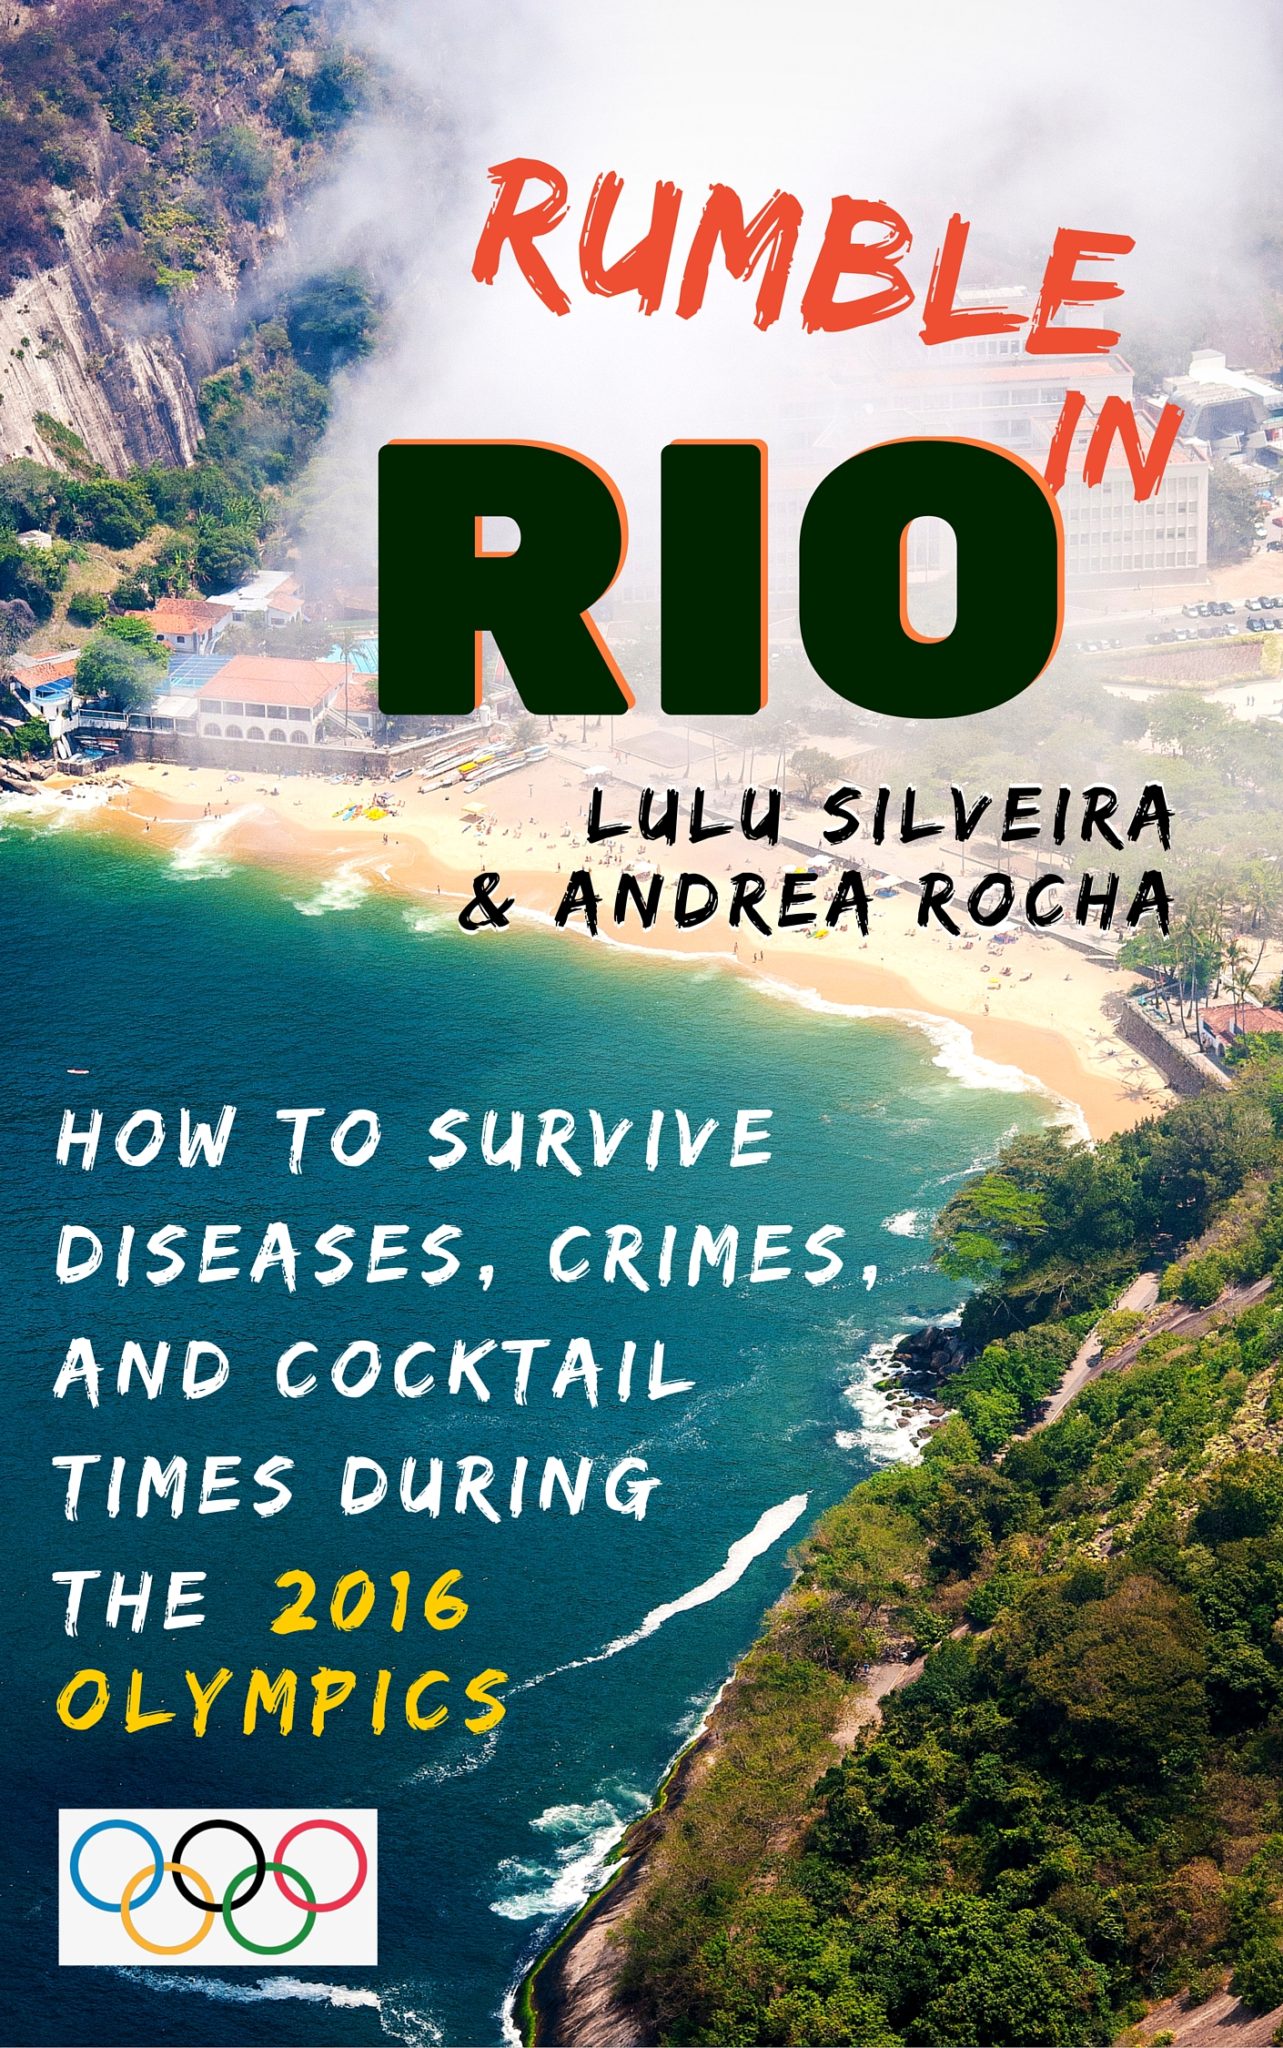 FREE: Rumble in Rio: How to Survive Diseases, Crimes, and Cocktail Times During the 2016 Olympics by Lulu Silveira